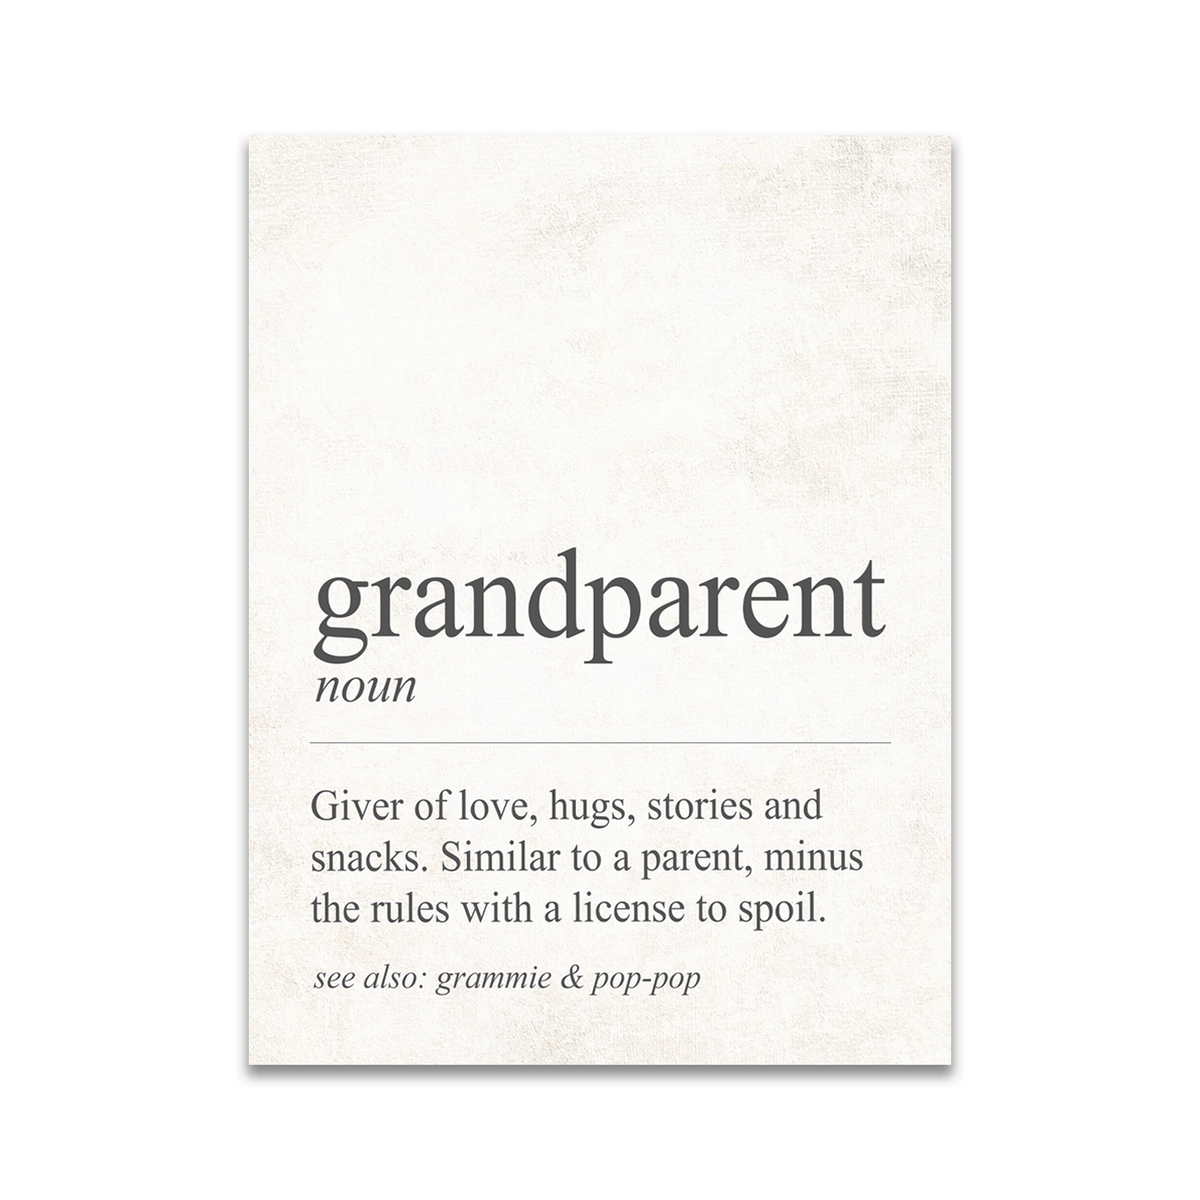 Grandparent sign - &quot;Giver of love, hugs, stories and snacks. Similar to a parent, minus the rules with a license to spoil.&quot; 